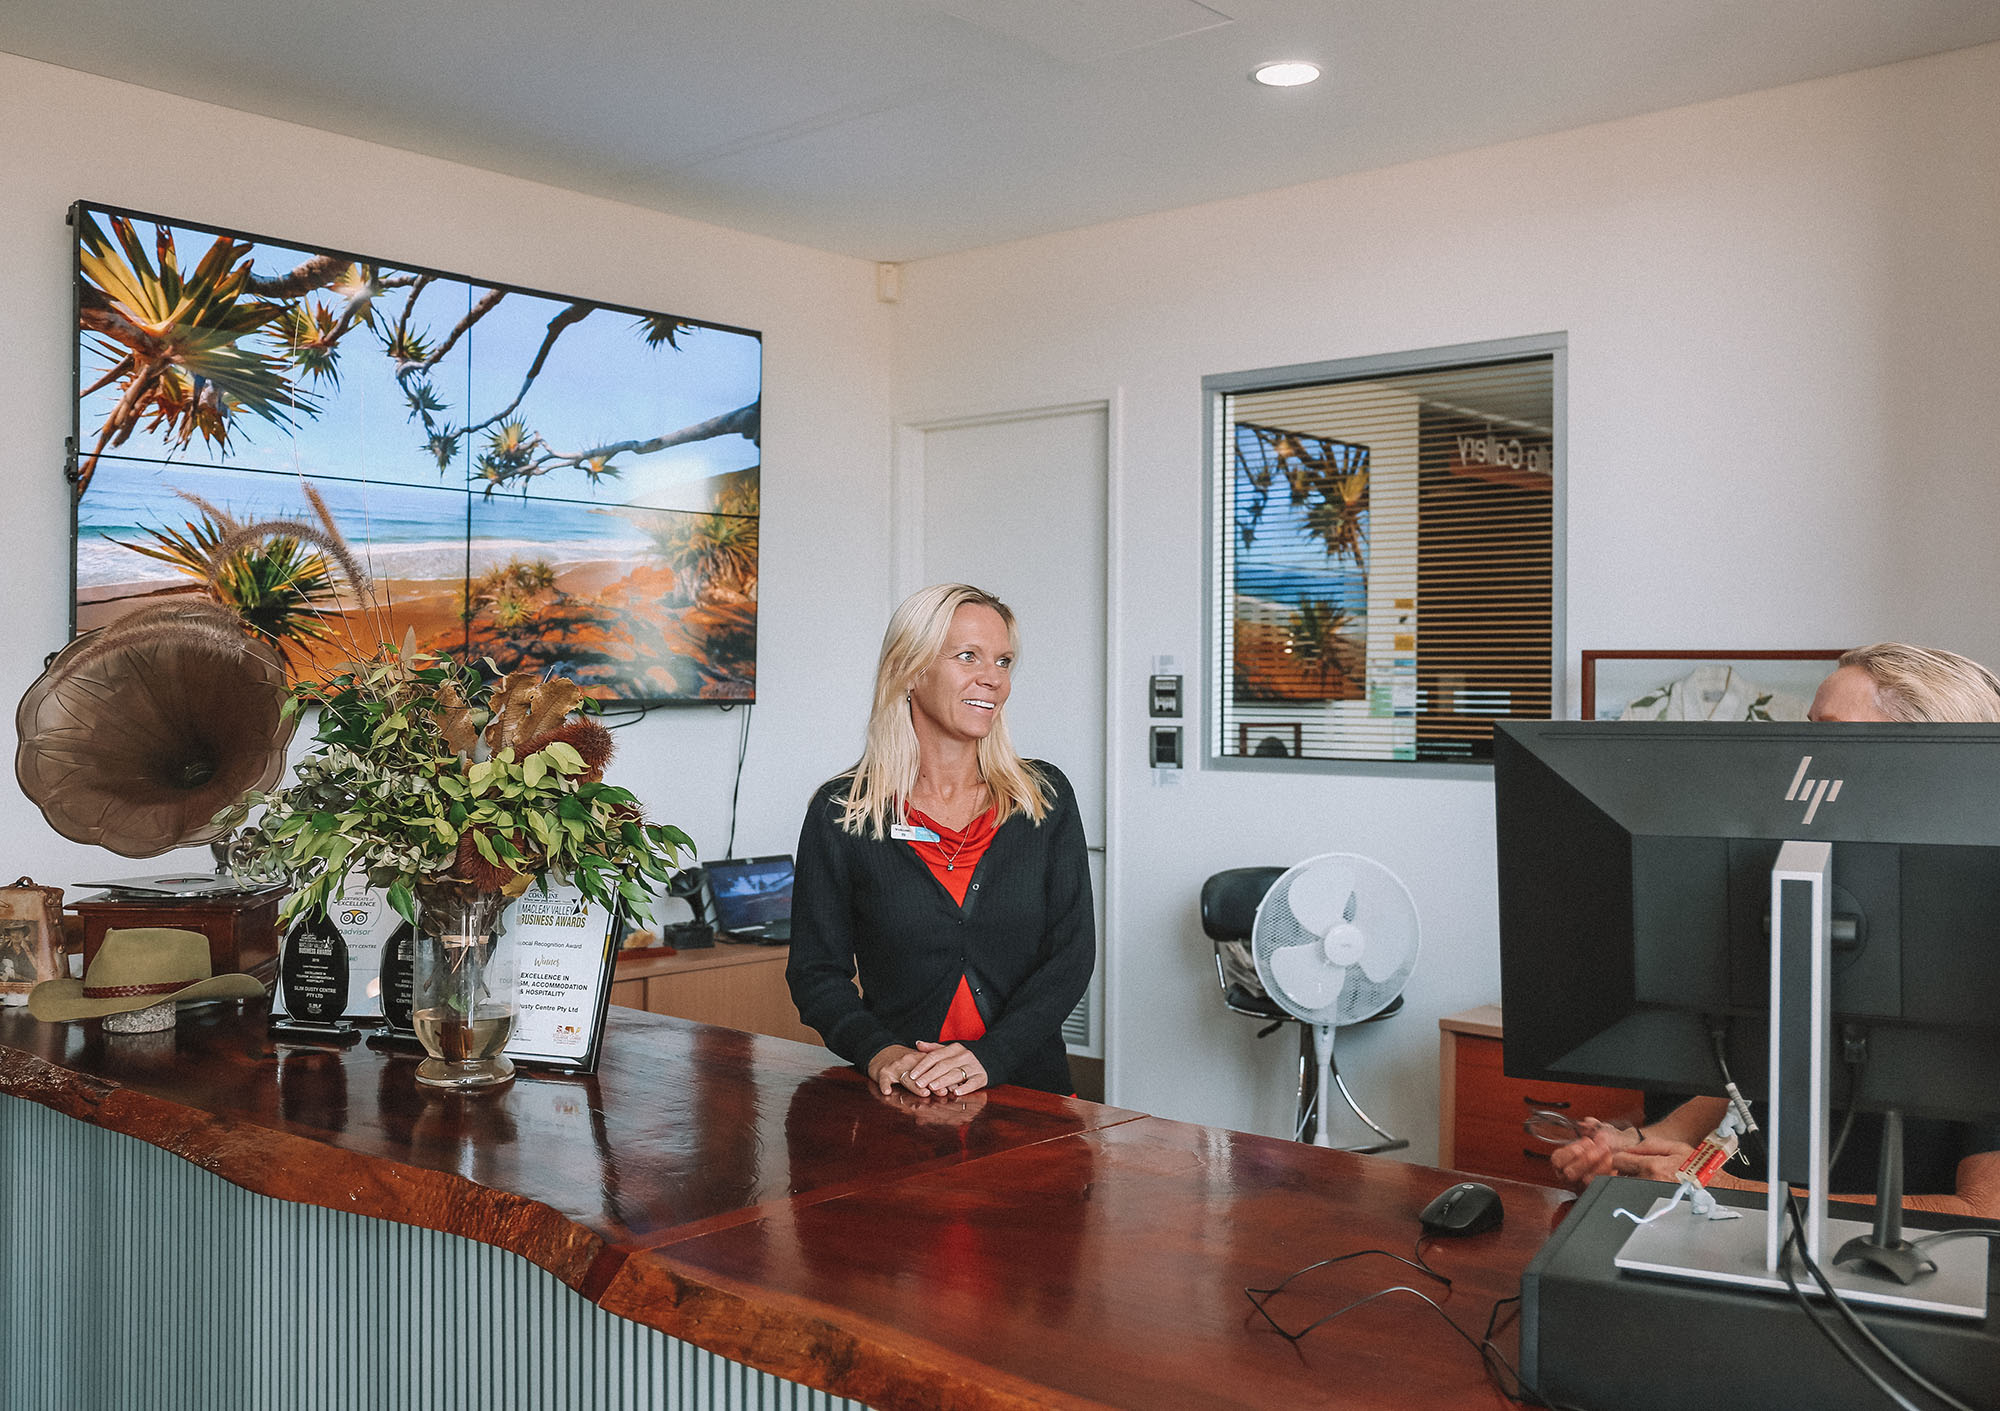 Customer experience officer standing at front desk at the Slim Dusty Centre.